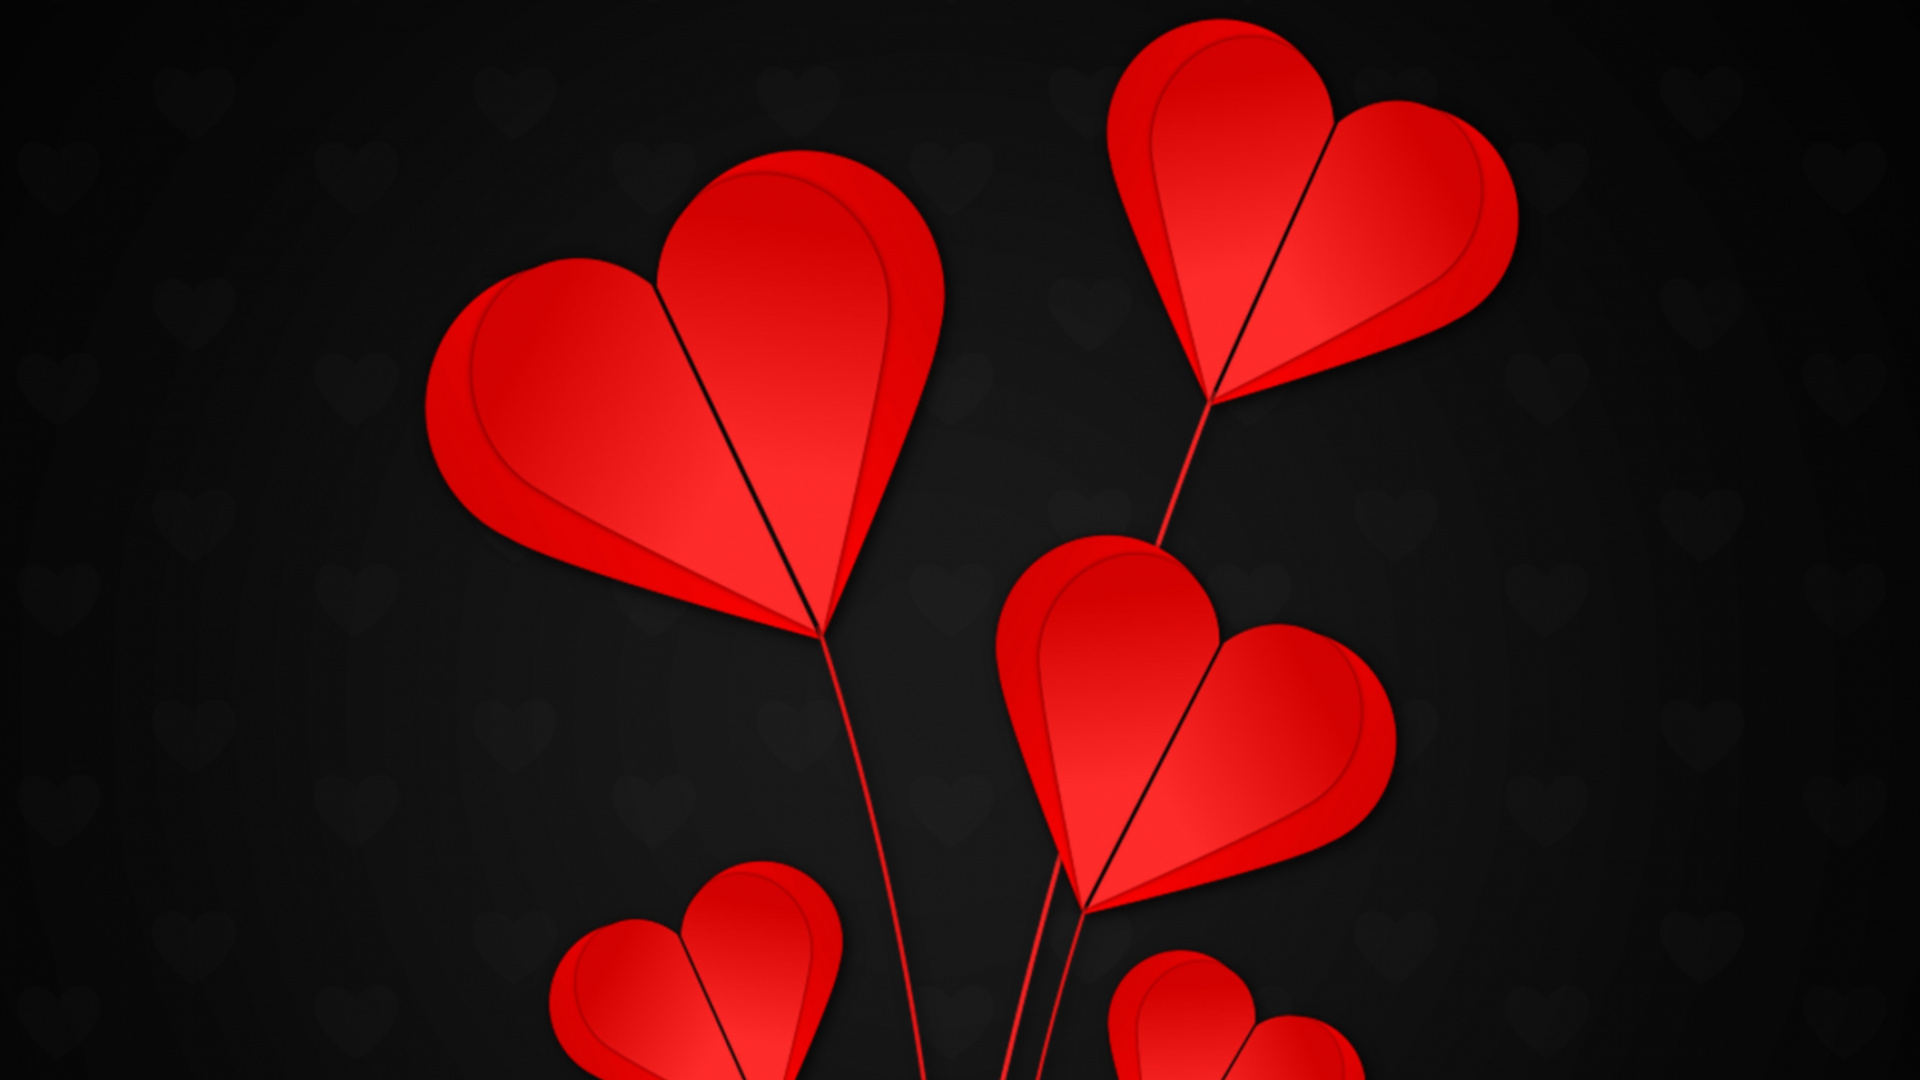 Heart, Red, Petal, Love, Valentines Day. Wallpaper in 1920x1080 Resolution